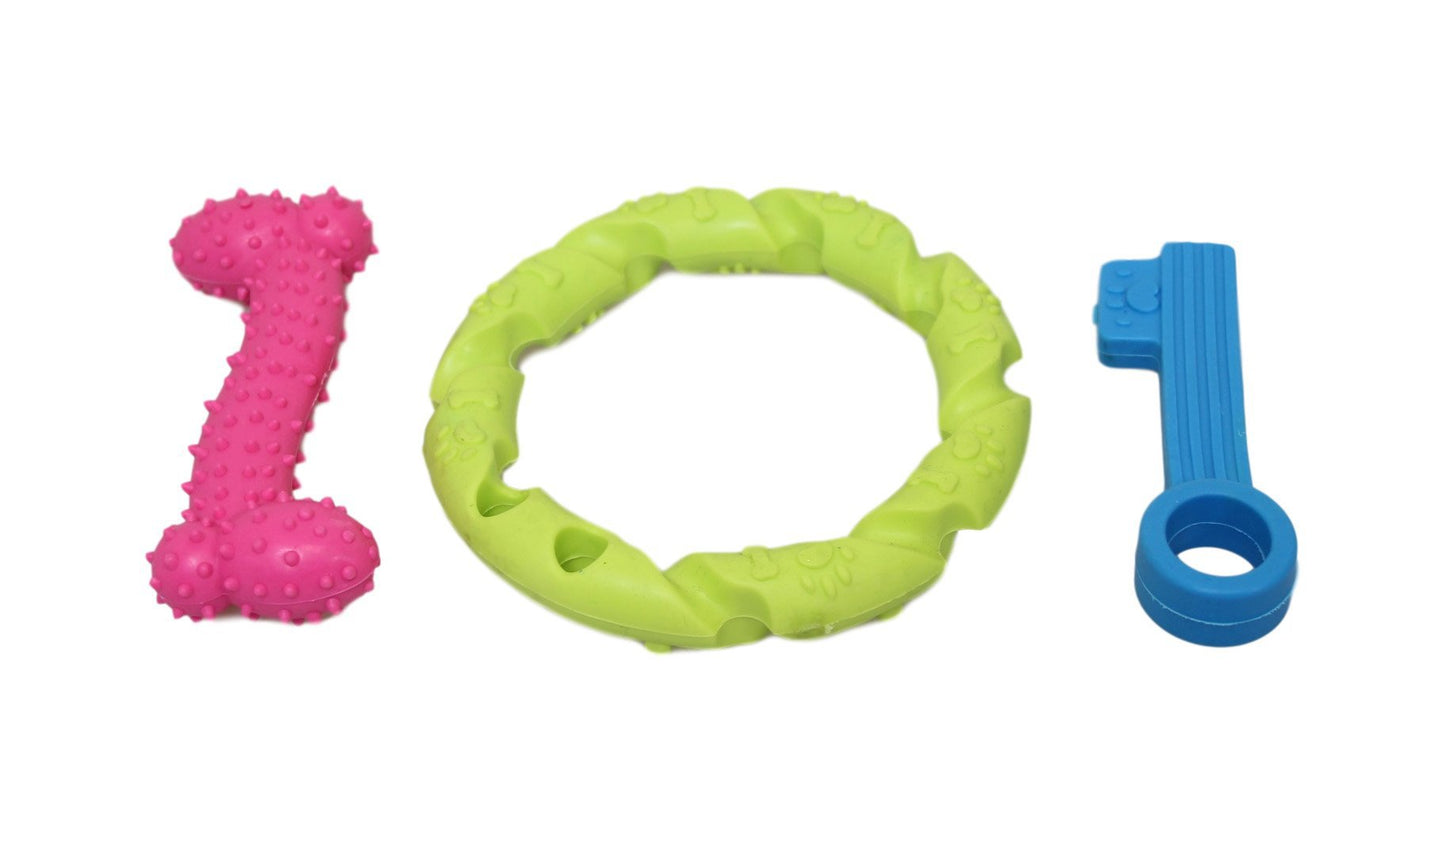 Dogs Fun Toys Teething Chewing Playing Silicone Set Pet Supplies 3 Pack 10cm 6042 (Parcel Rate)